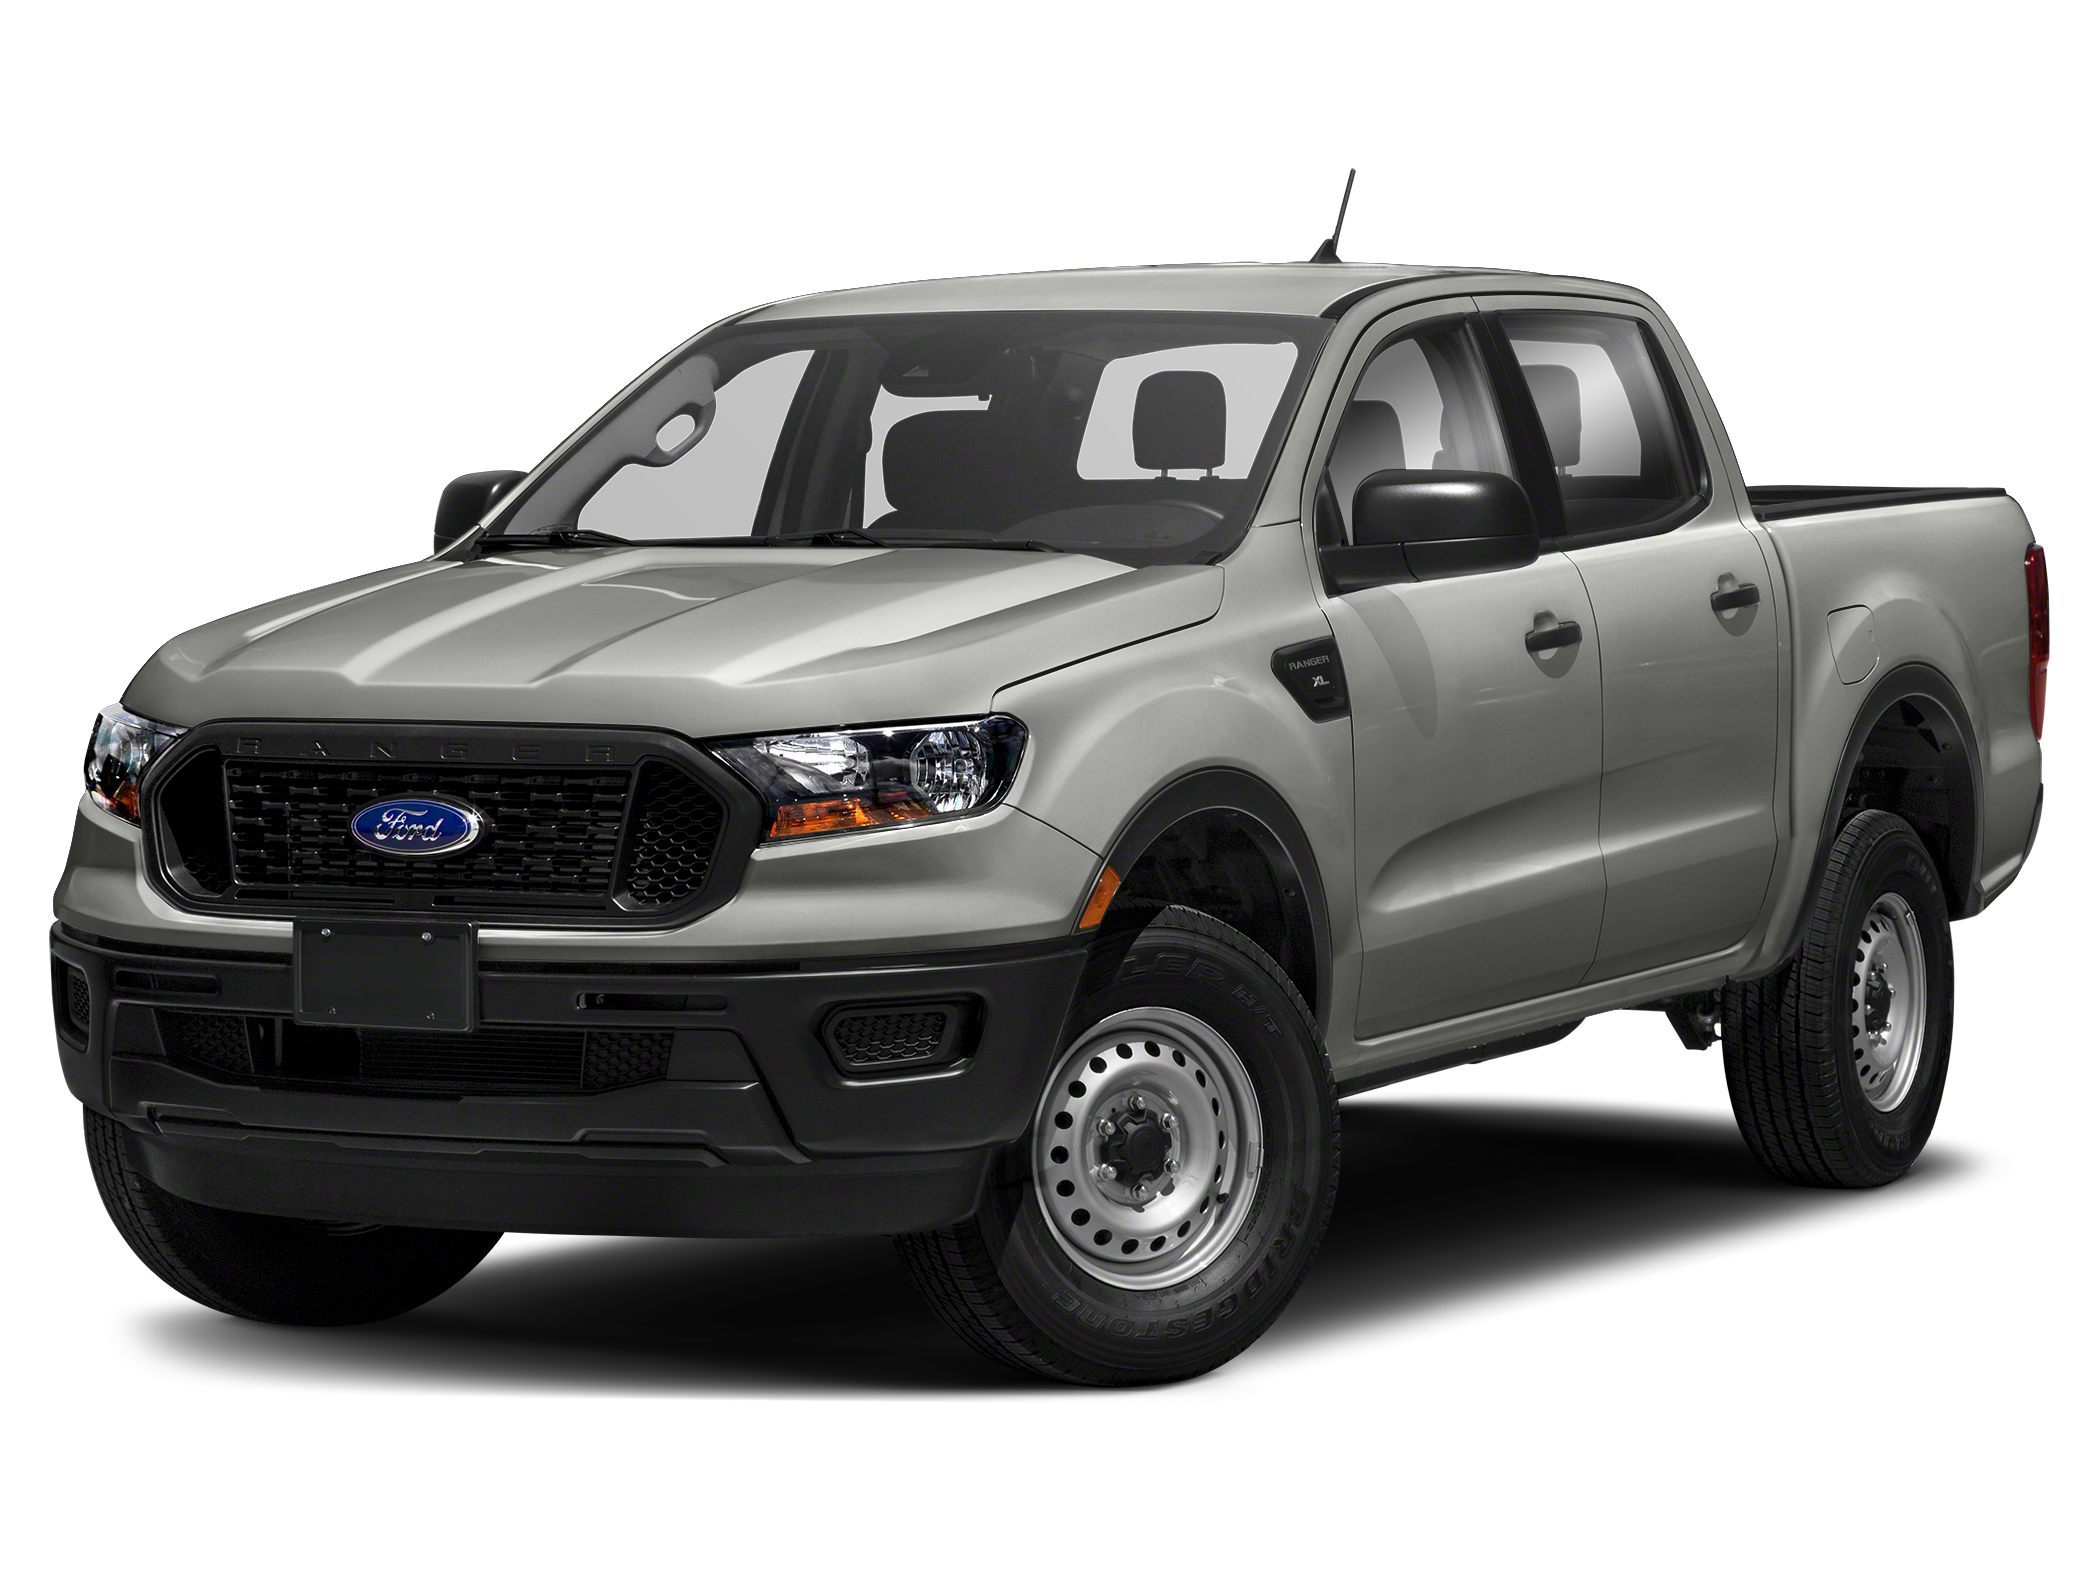 2021 Ford Ranger Crew Cab Short Bed Truck 